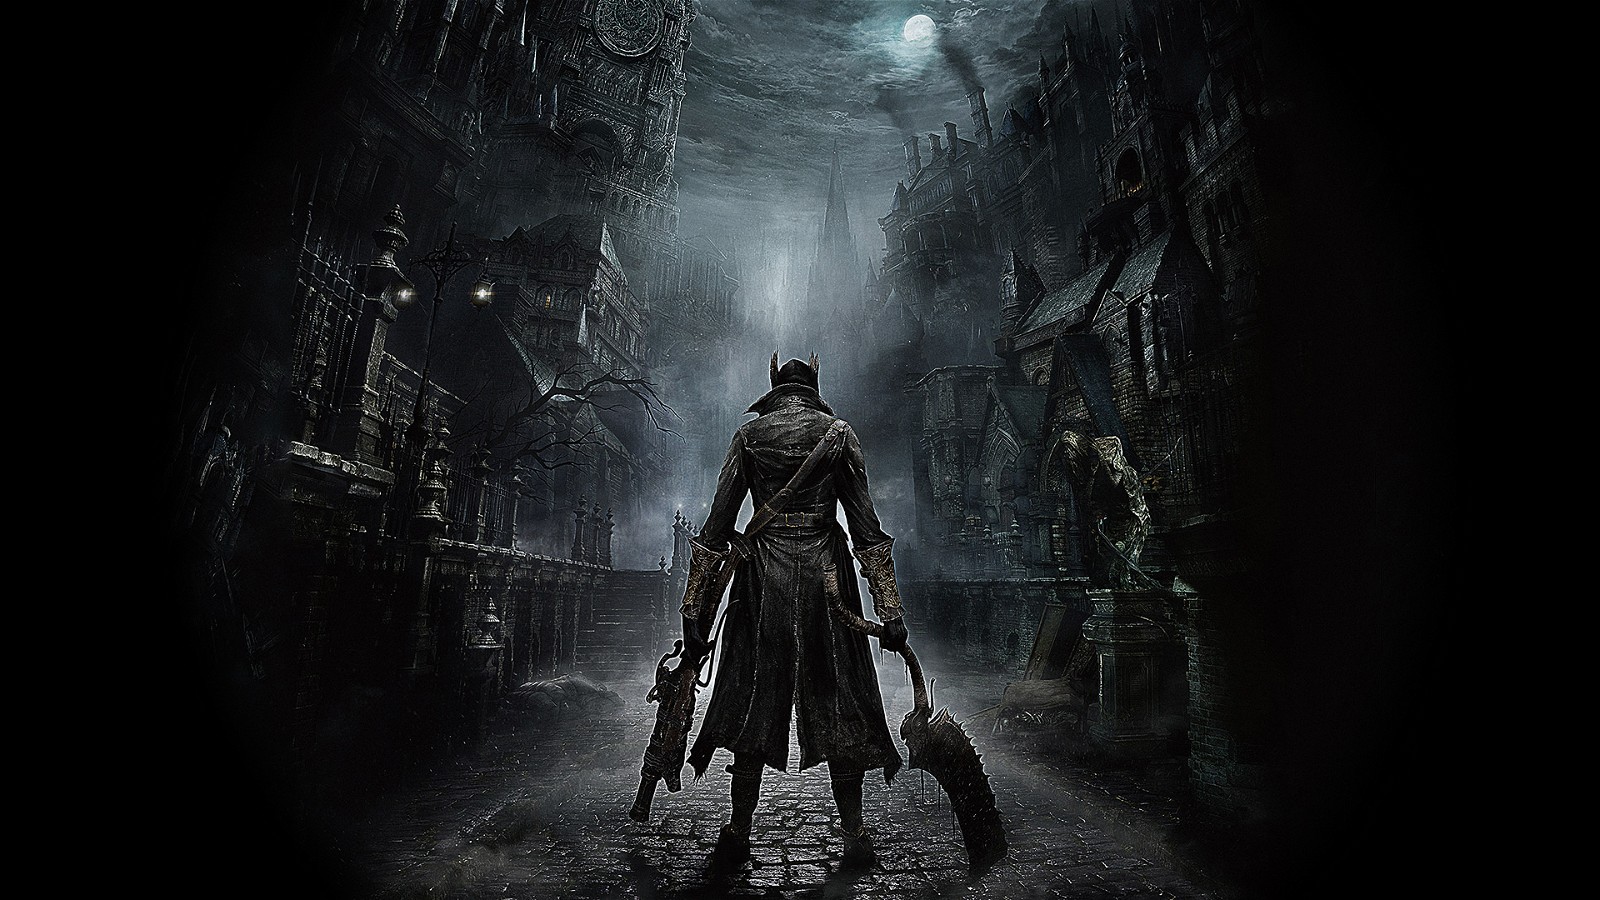 The director of Bloodborne, Hidetaka Miyazaki, disclosed he attempted to save a character in the game.